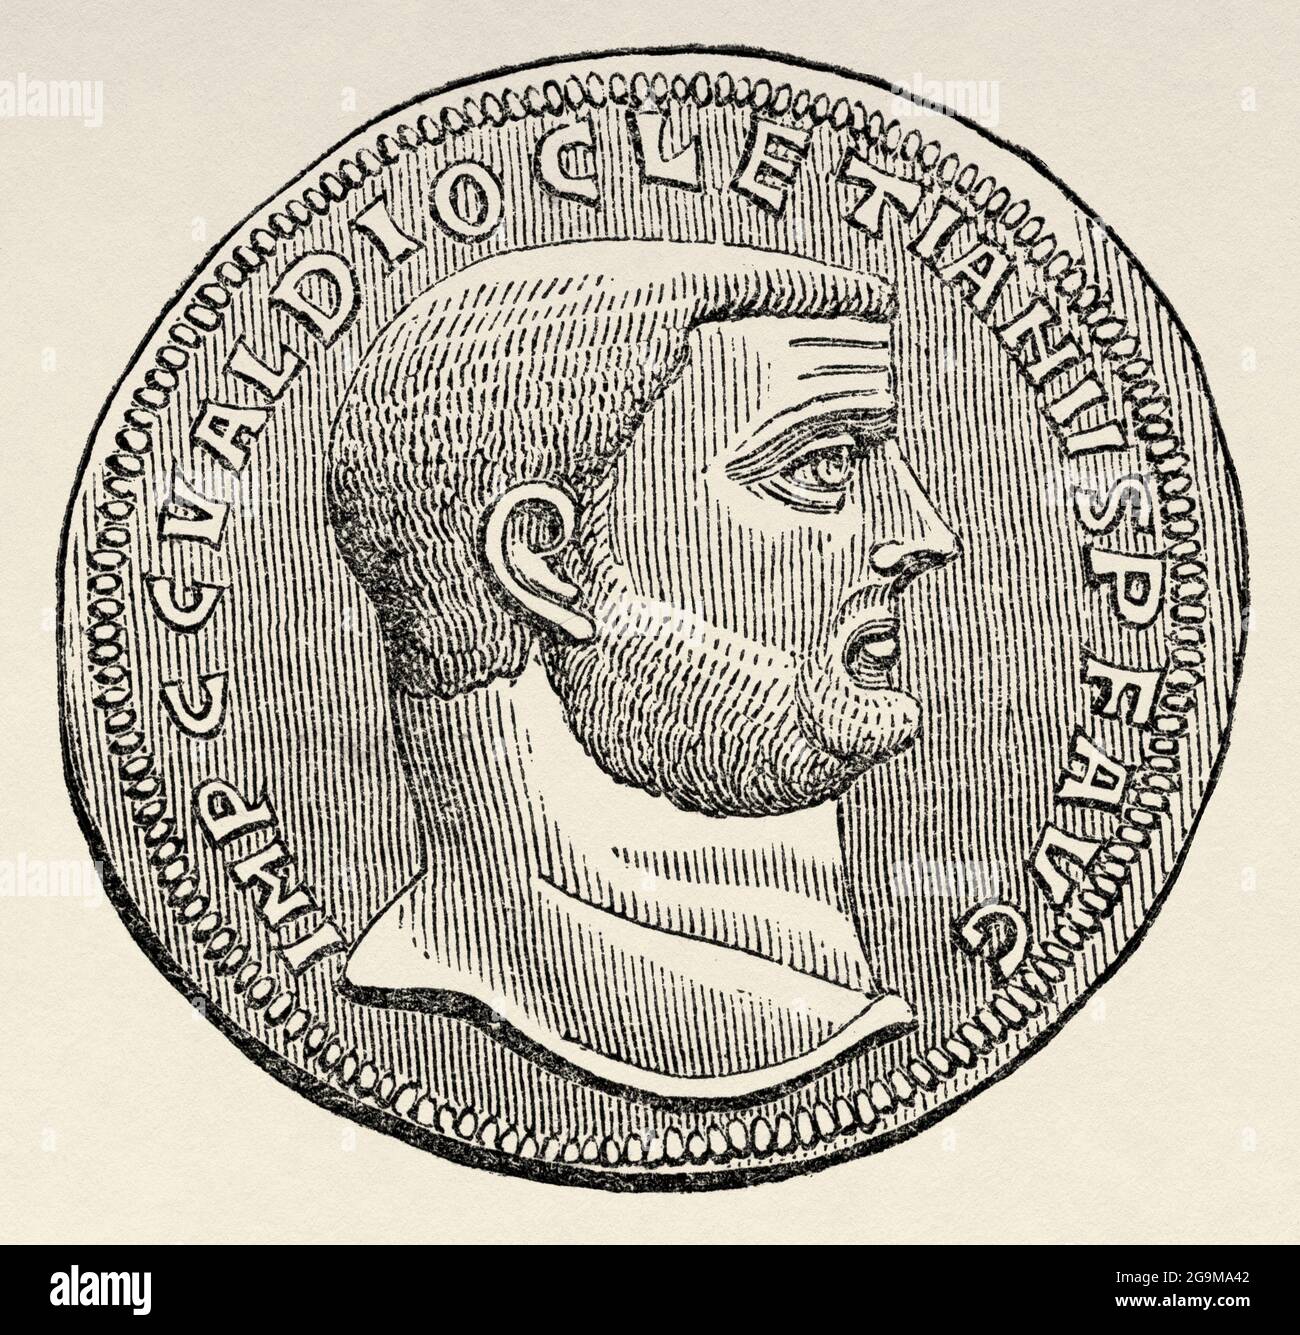 Diocletian Emperor Medal. Old 19th century engraved illustration from Jesus Christ by Veuillot 1881 Stock Photo